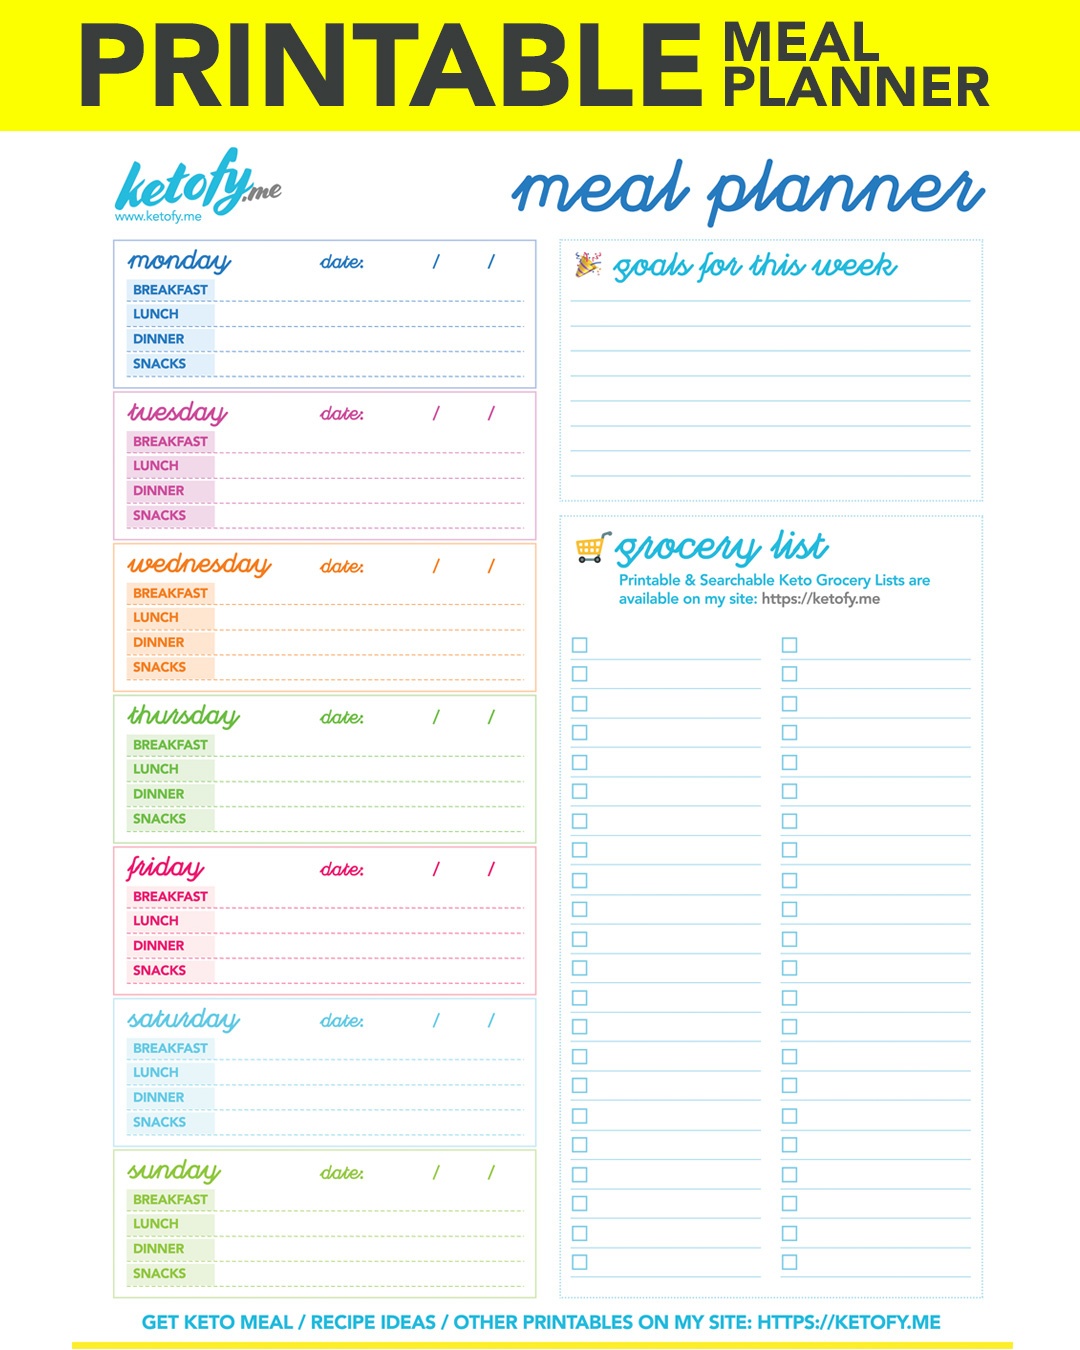 Keto ~ Fy Me | Cut Carbs, Not Flavor! • Printable Keto Meal Planner - Free Printable Meal Plans For Weight Loss